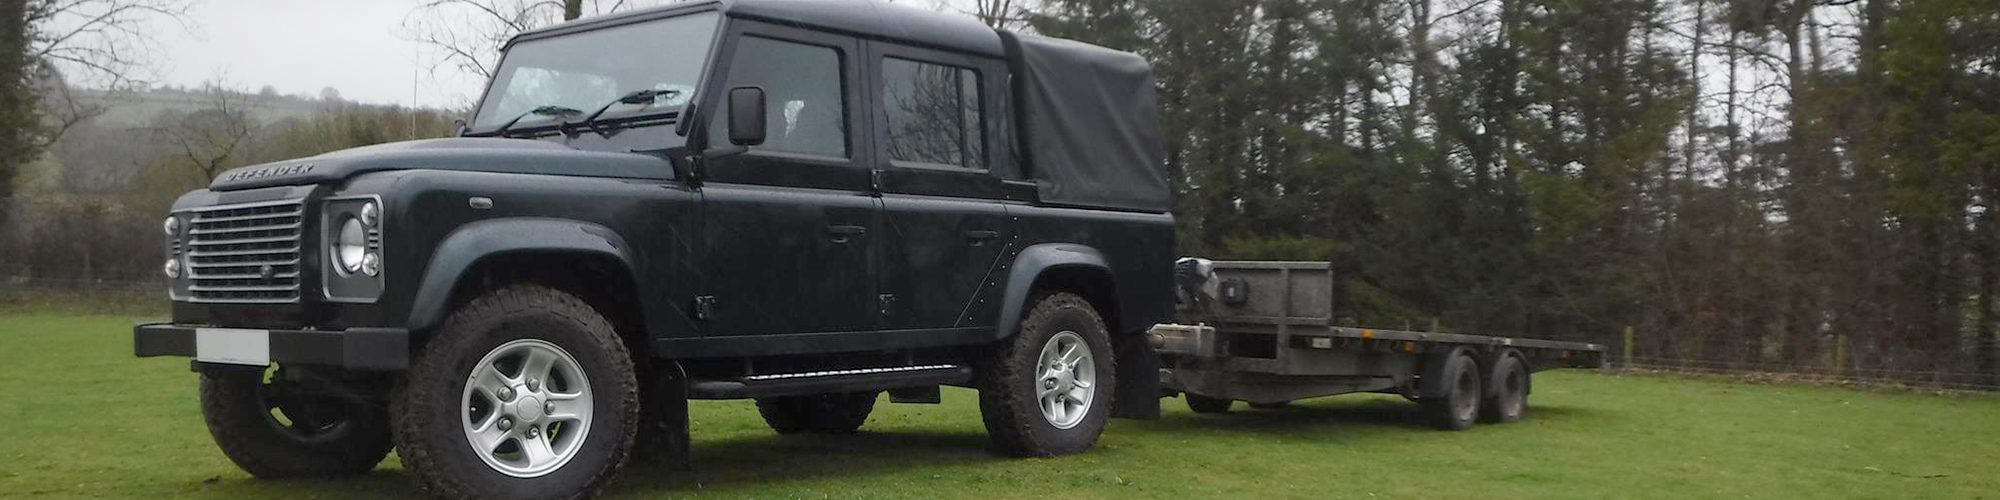 RVS, Rudkin Vehicle Services, Vehicle Services, Land Rover, Land Rover Specialists, Crewkerne, Somerset, Used Land Rover, Land Rovers for Sale, Car Sale, Land Rover Workshop, Motoring, Car Dealership, Car Dealership Somerset, Car Dealership Crewkerne, Range Rover, Servicing, MOTS